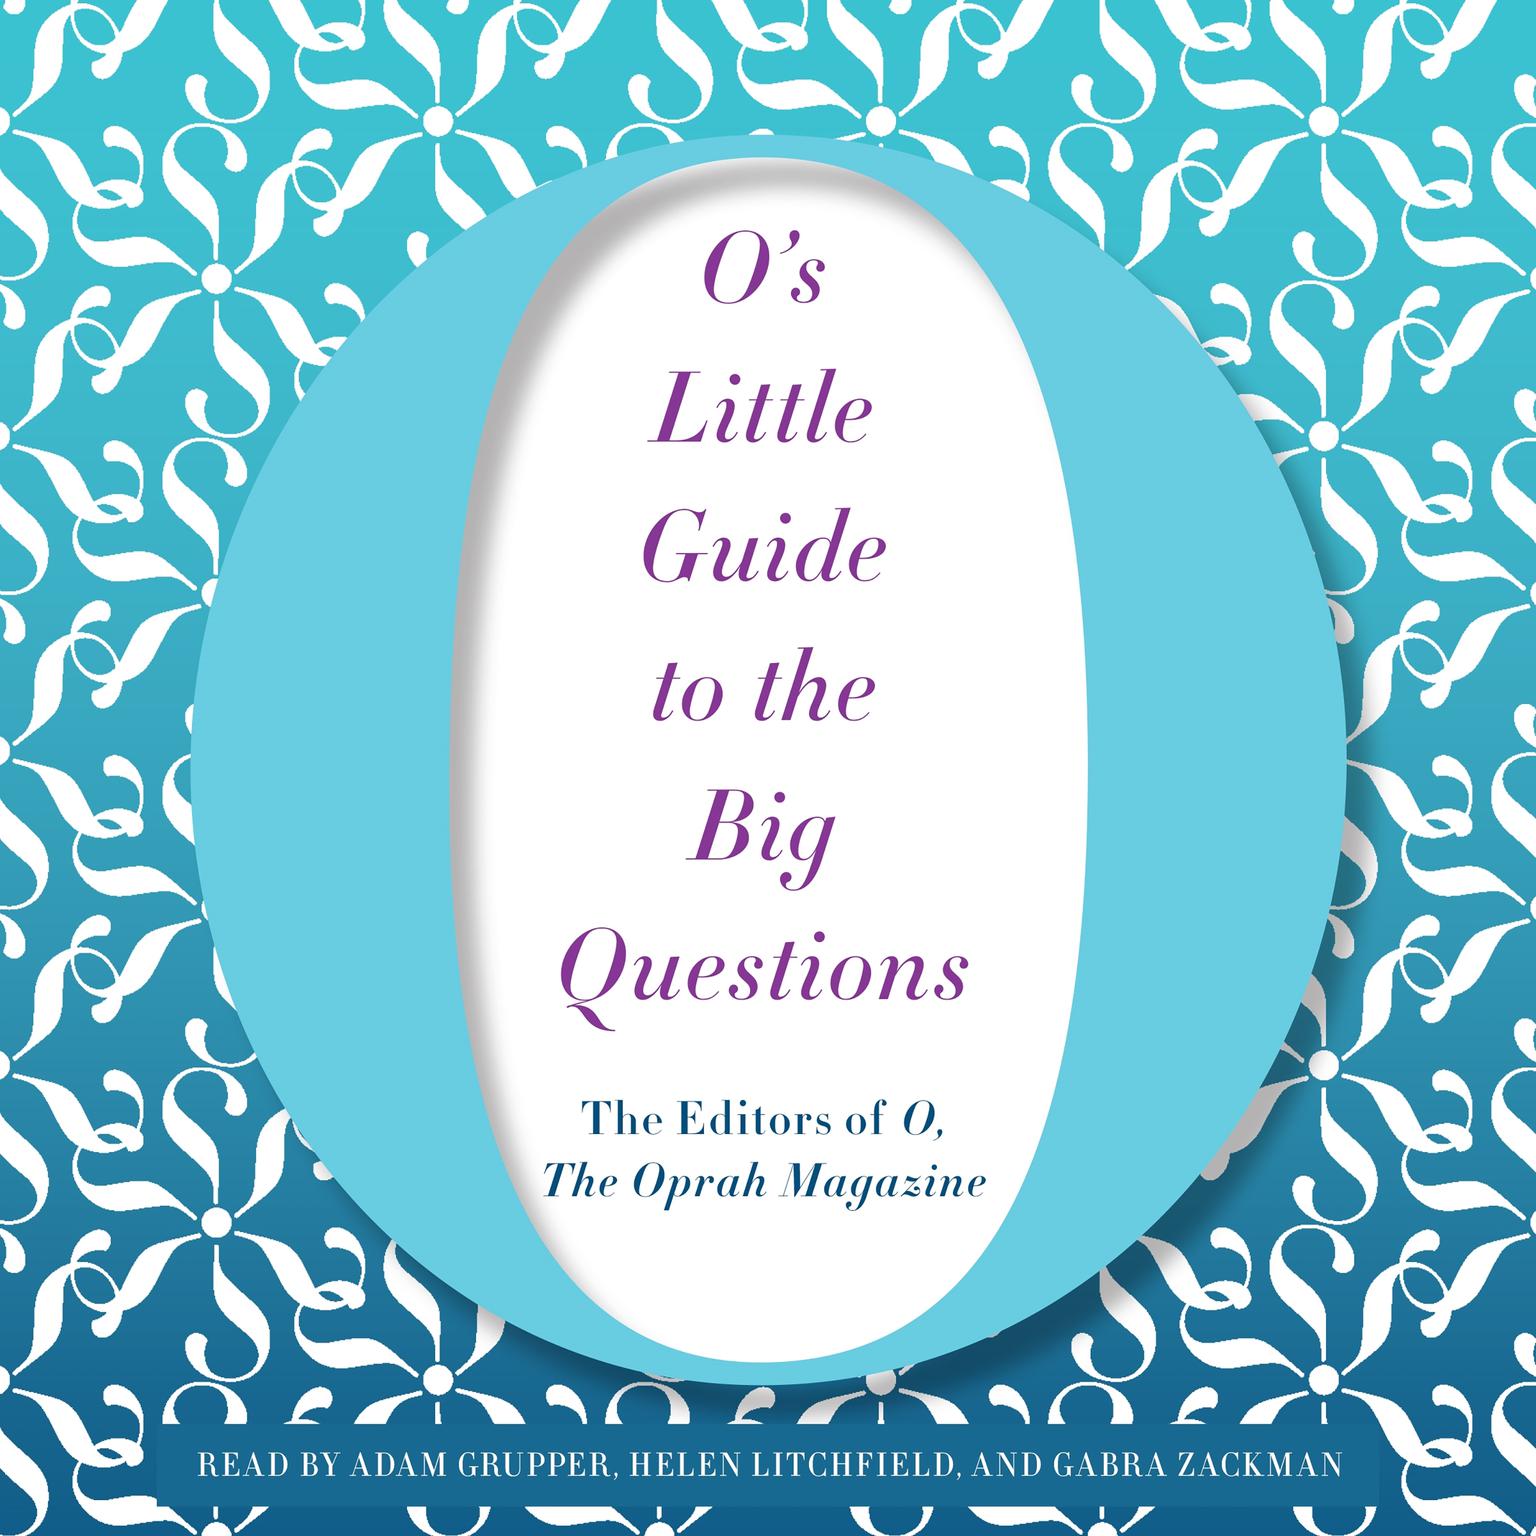 O’s Little Guide to the Big Questions Audiobook, by The Editors of O, The Oprah Magazine